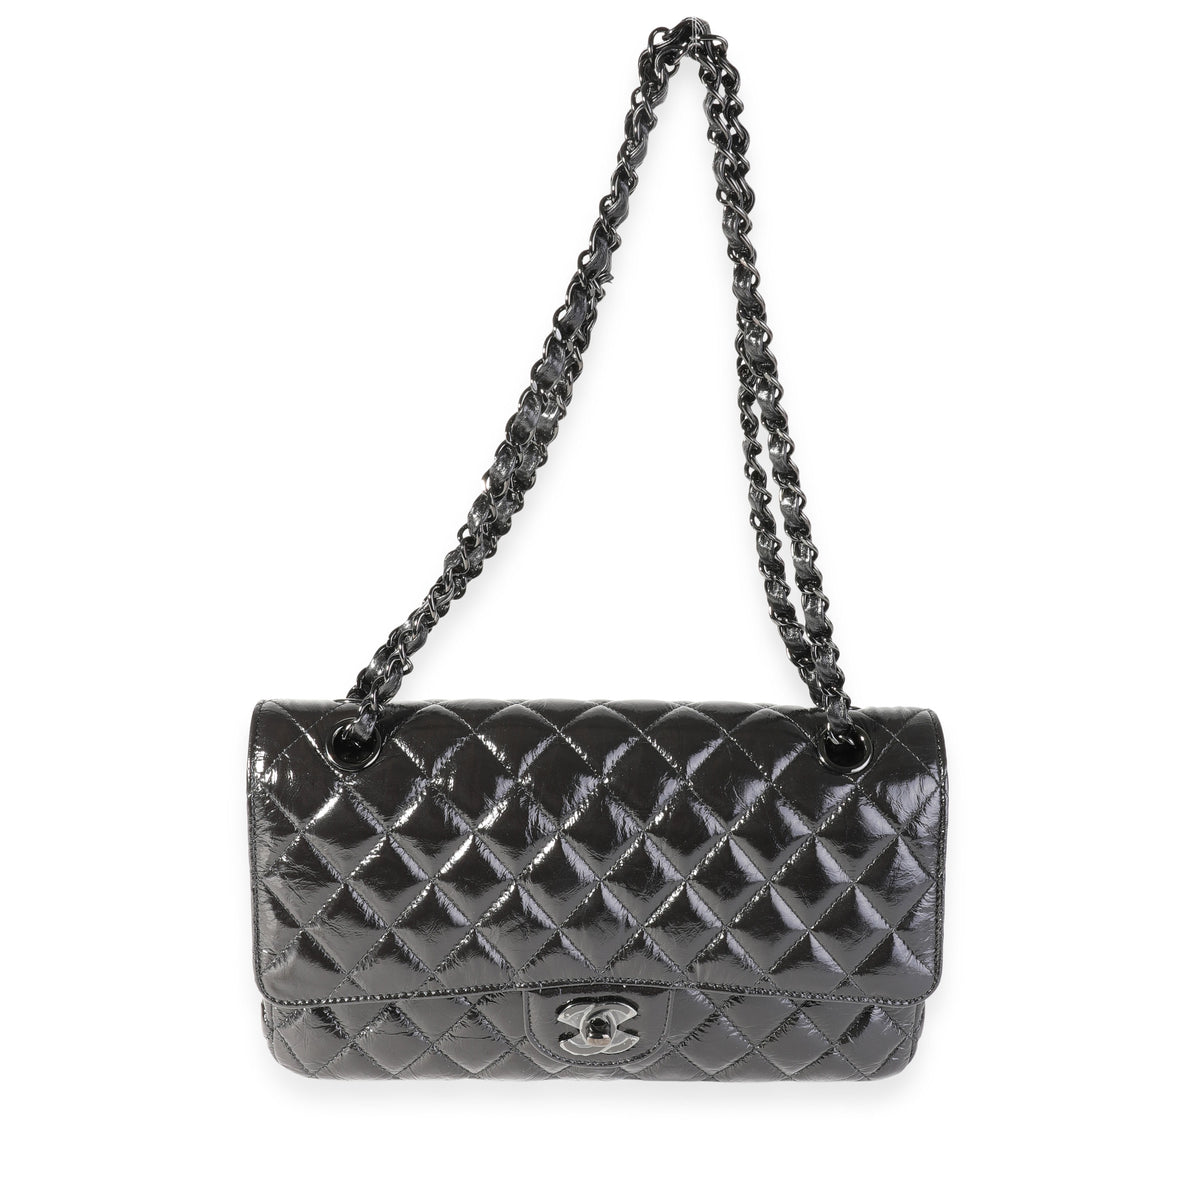 Chanel Black Crumpled Patent Leather Droplet Bag Chanel | The Luxury Closet